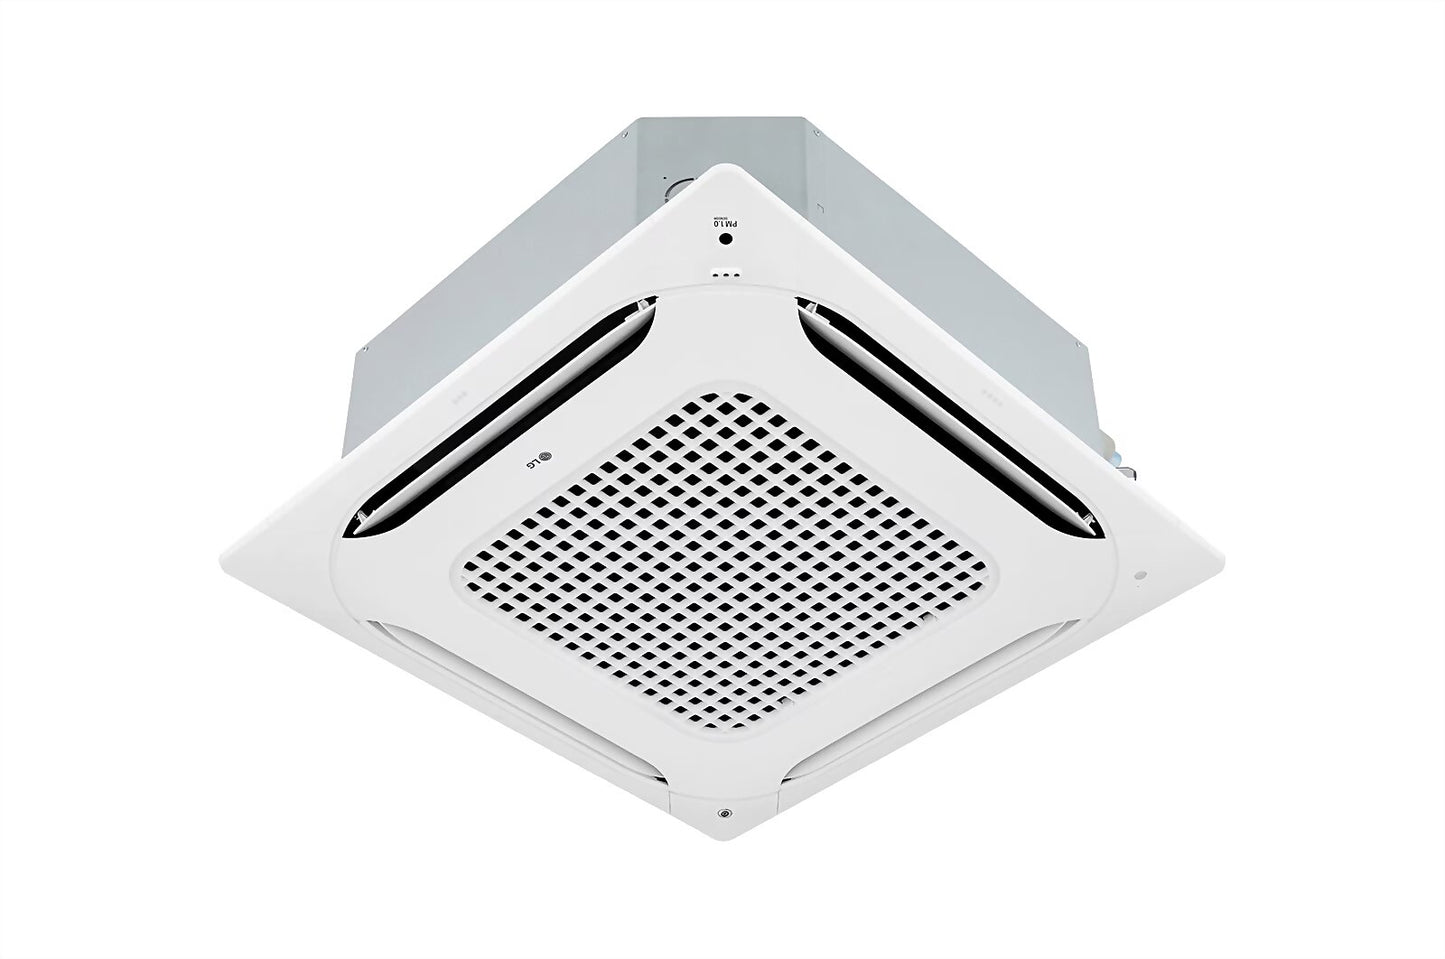 LG Ceiling Mounted 4 Way Cassette Inverter AC 5.6KW with Advanced Air Purification and Independent Vane Control - ARNU18GTQB4